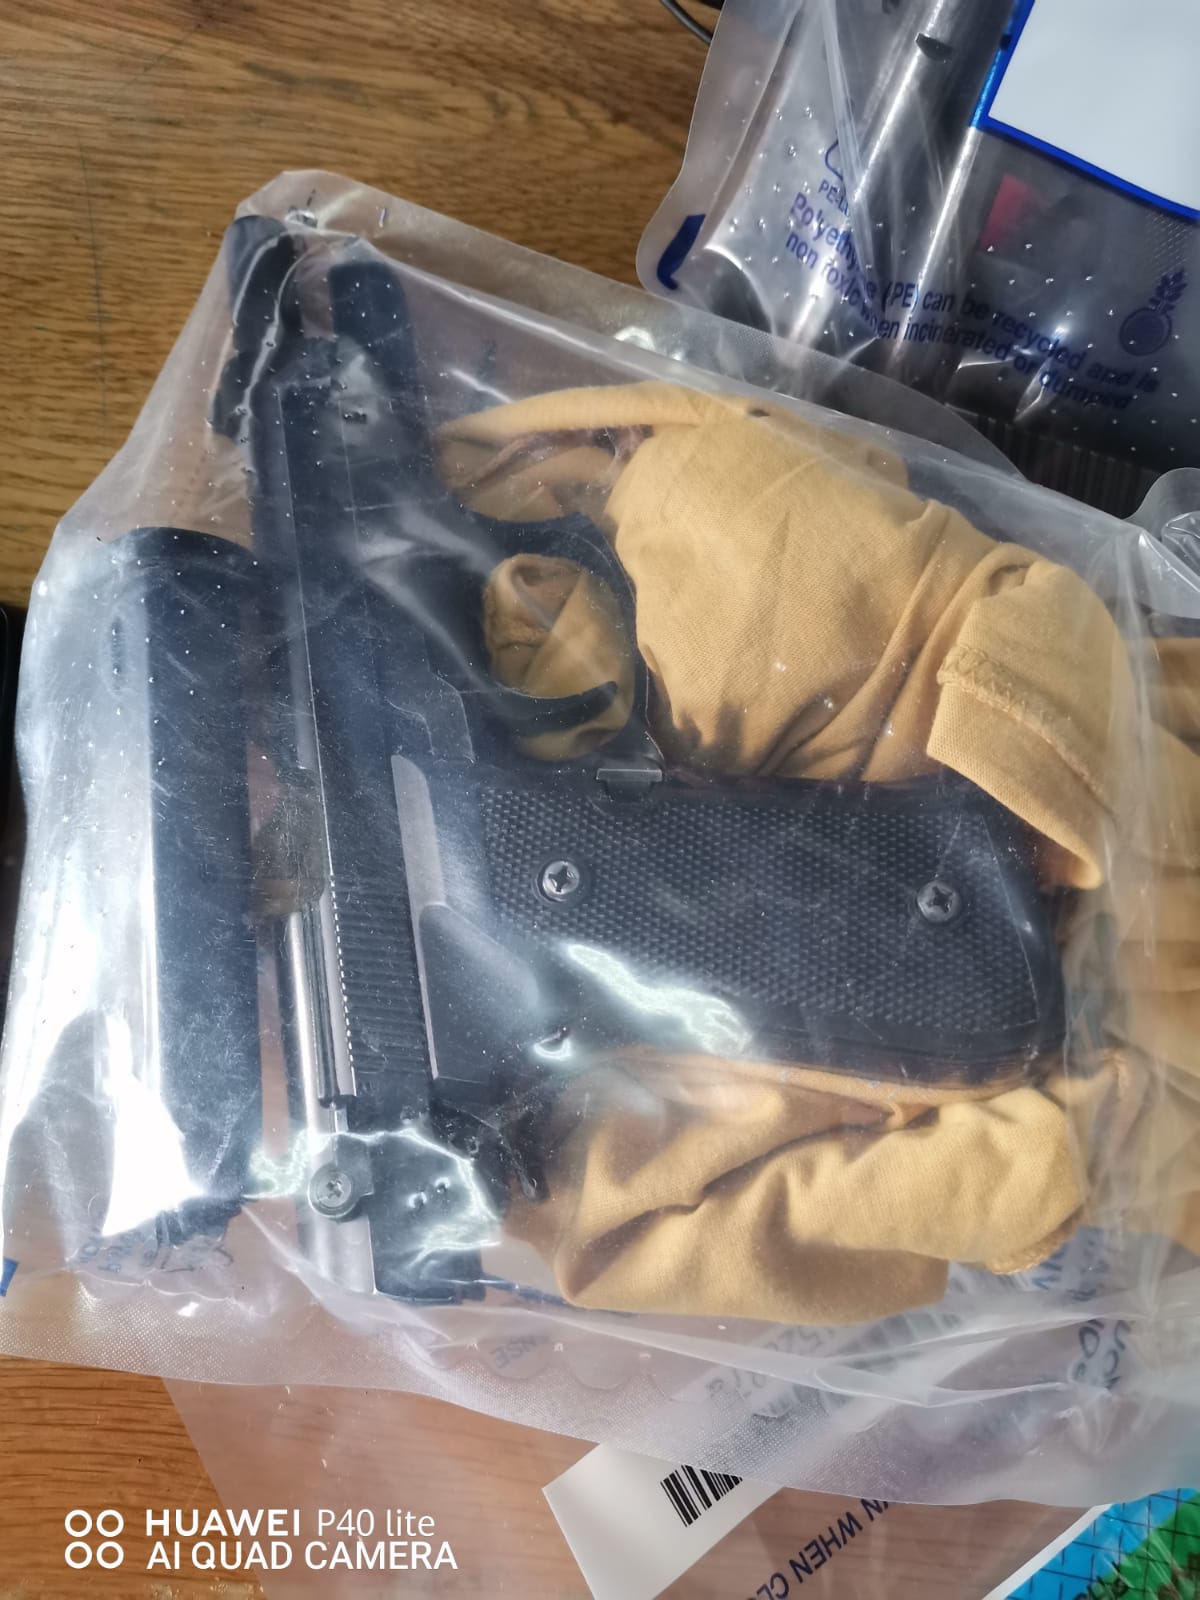 Three suspects arrested for the possession of unlicensed firearms and possession of suspected stolen property in Rawsonville